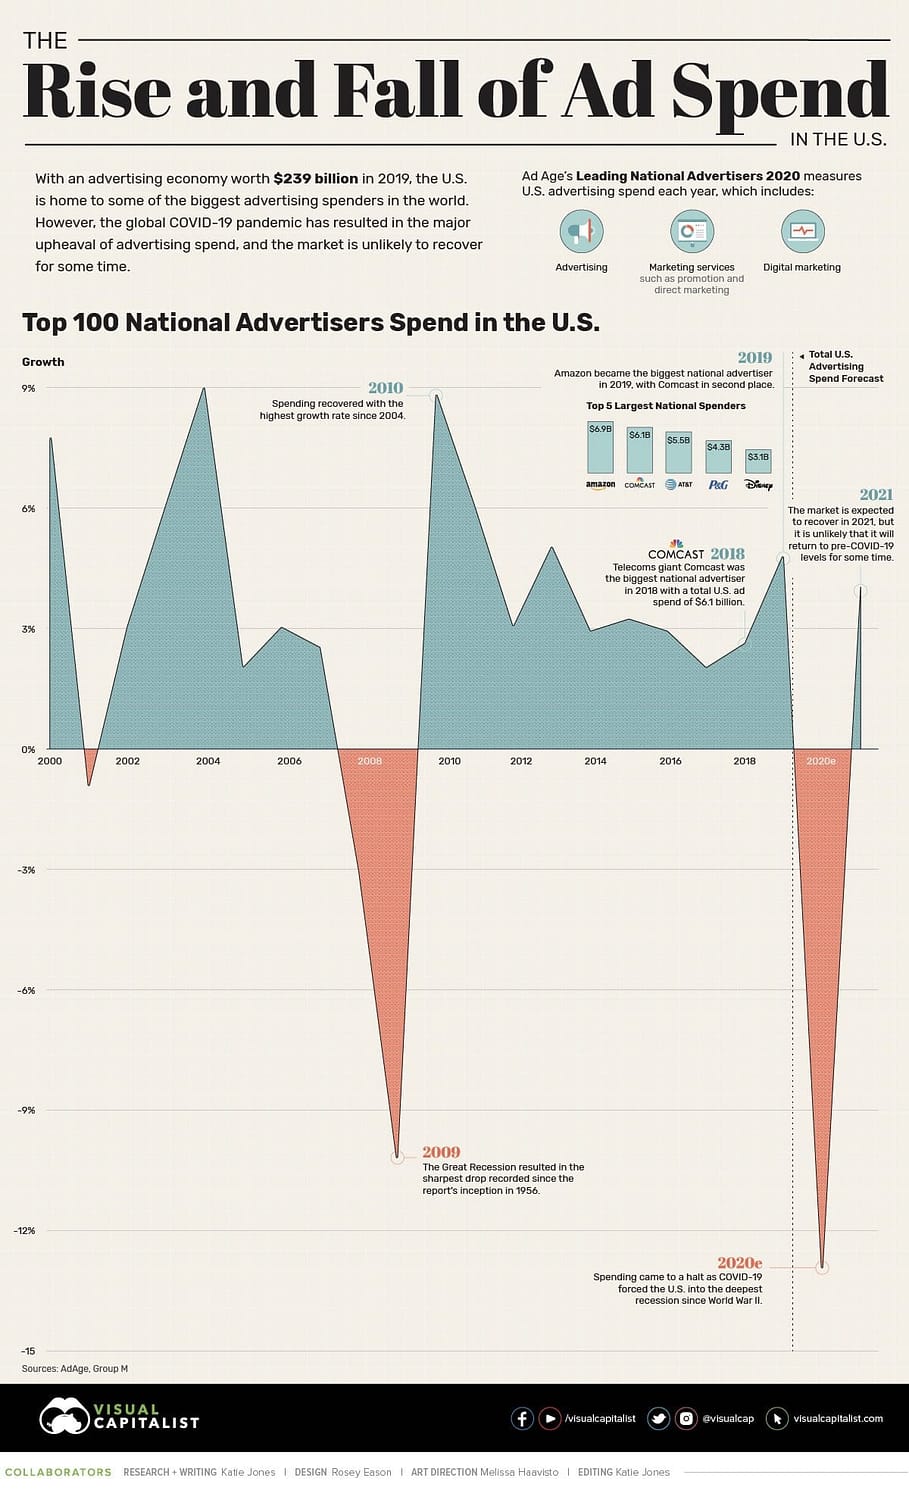 Top 100 National Advertisers Spend in the U.S.